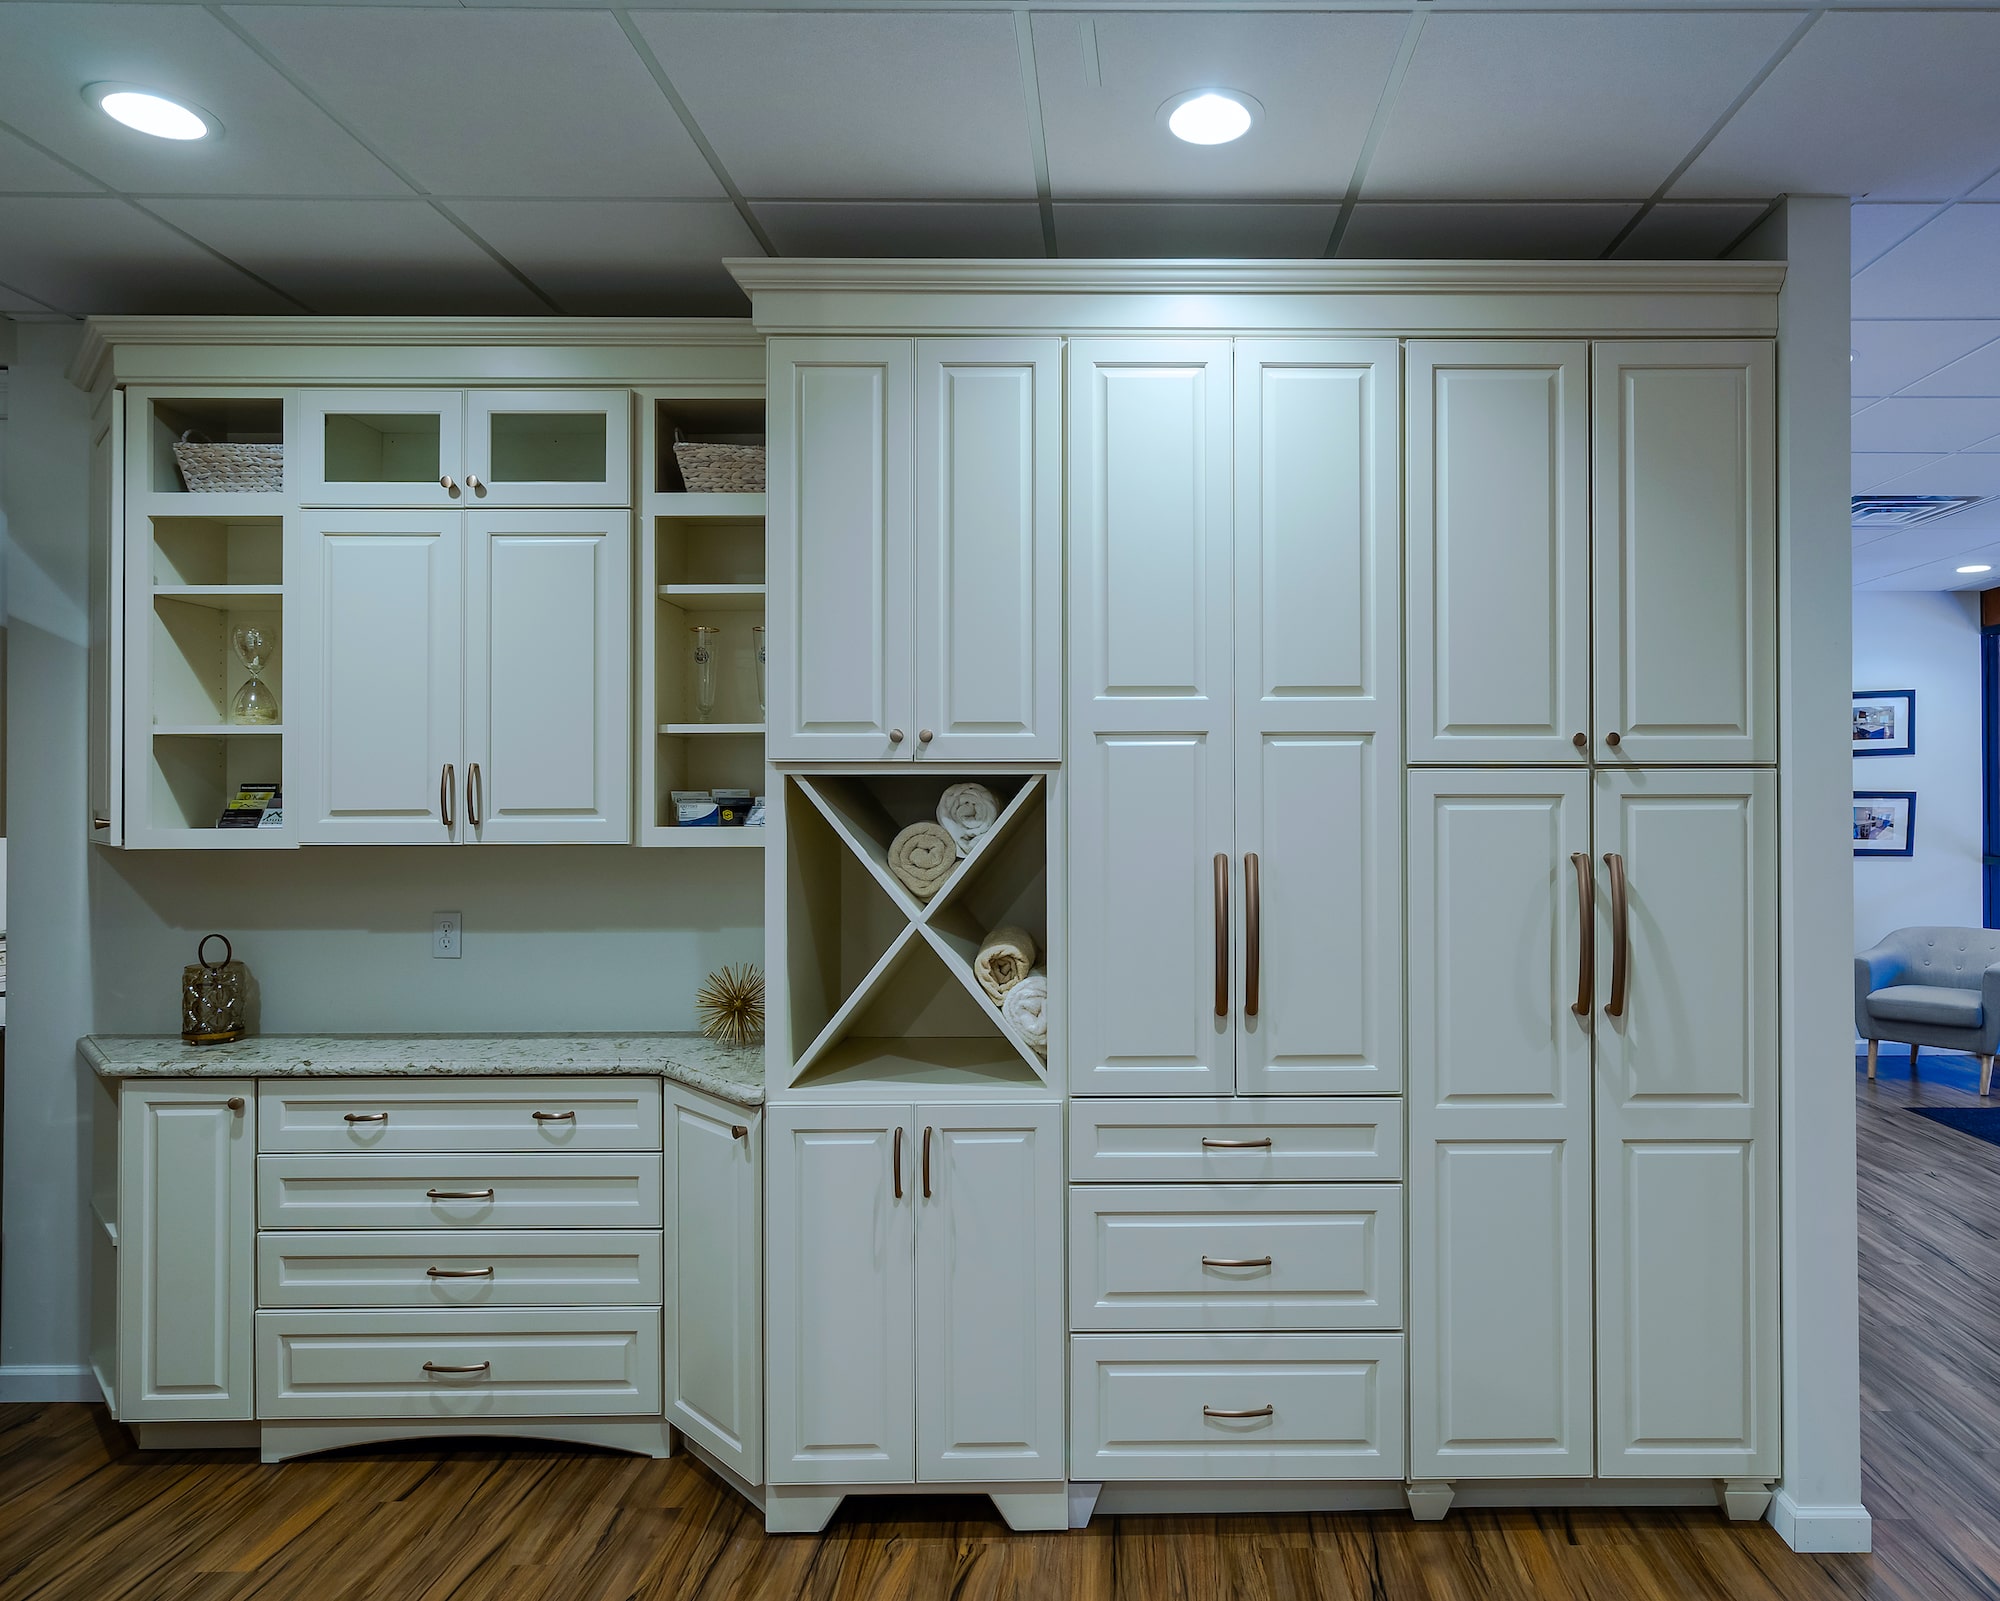 Image of a showroom cabinet options.